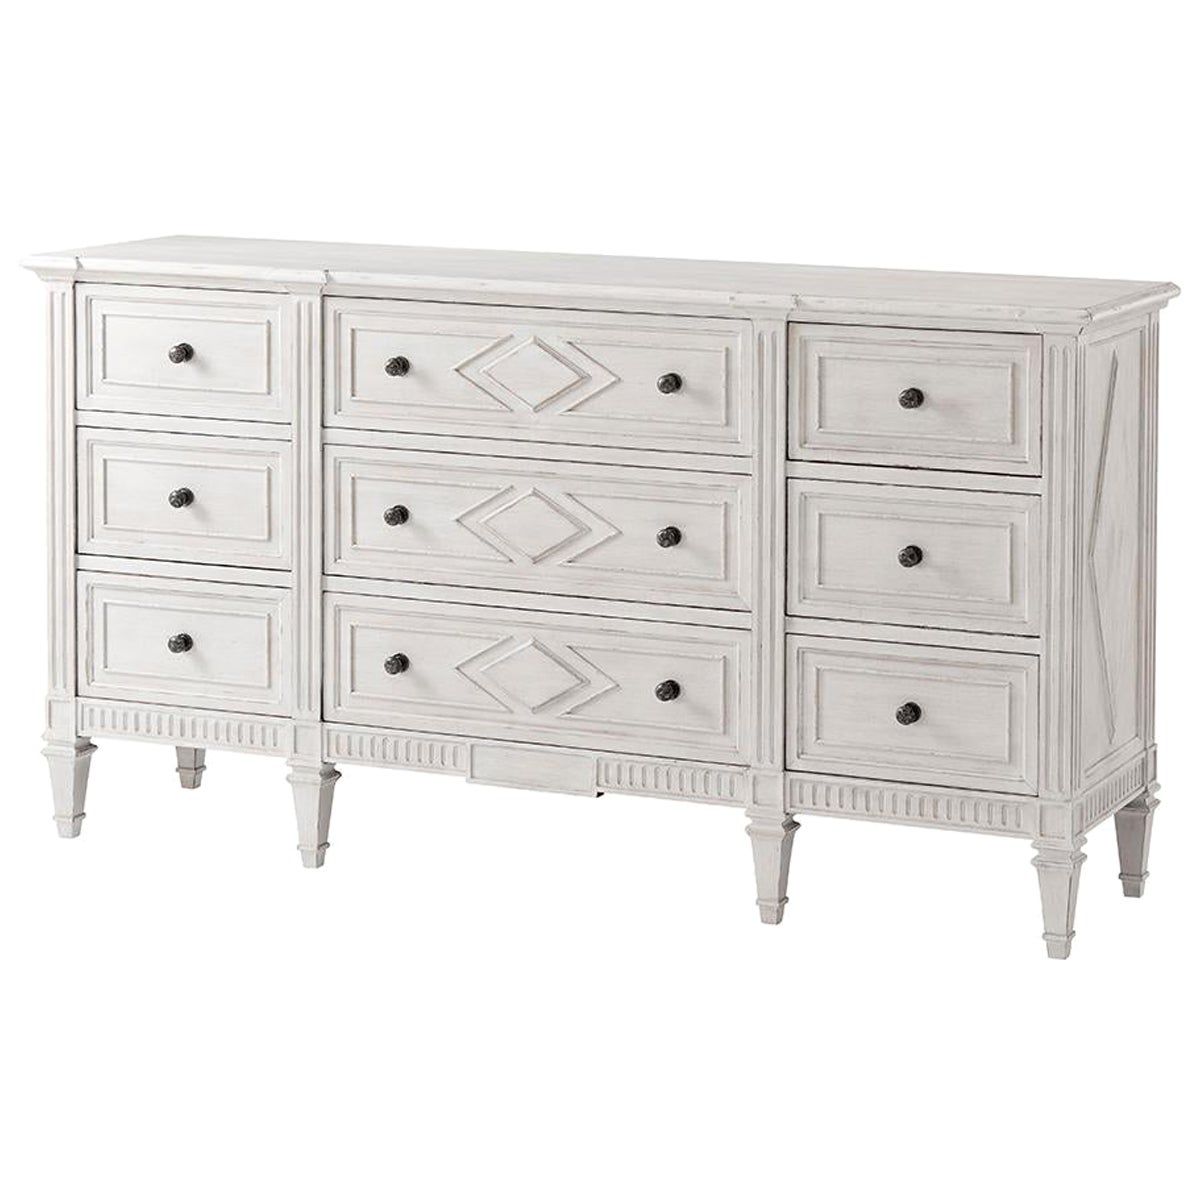 French Painted Antique Style Dresser